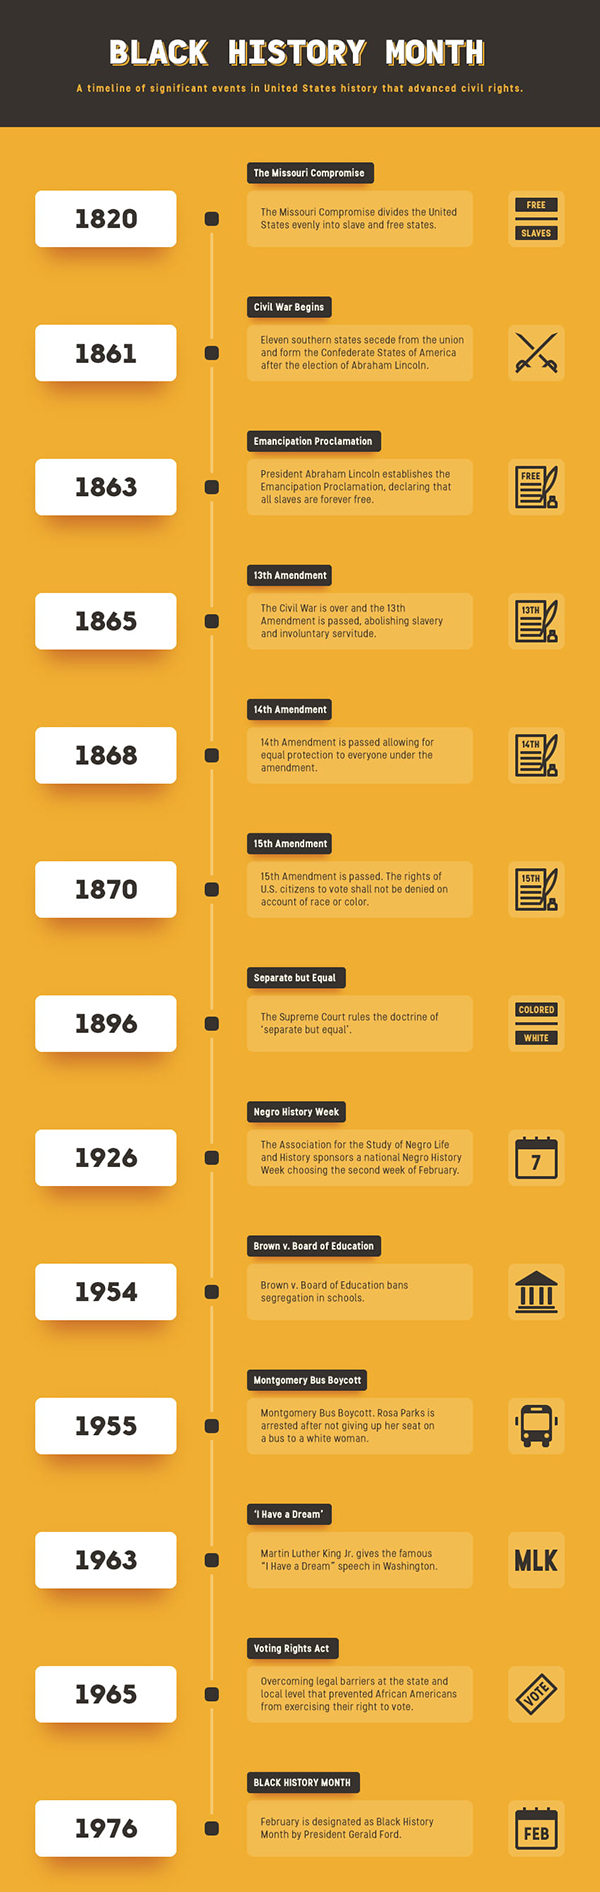 How to Create a Timeline Infographic for Black History Month in Illustrator